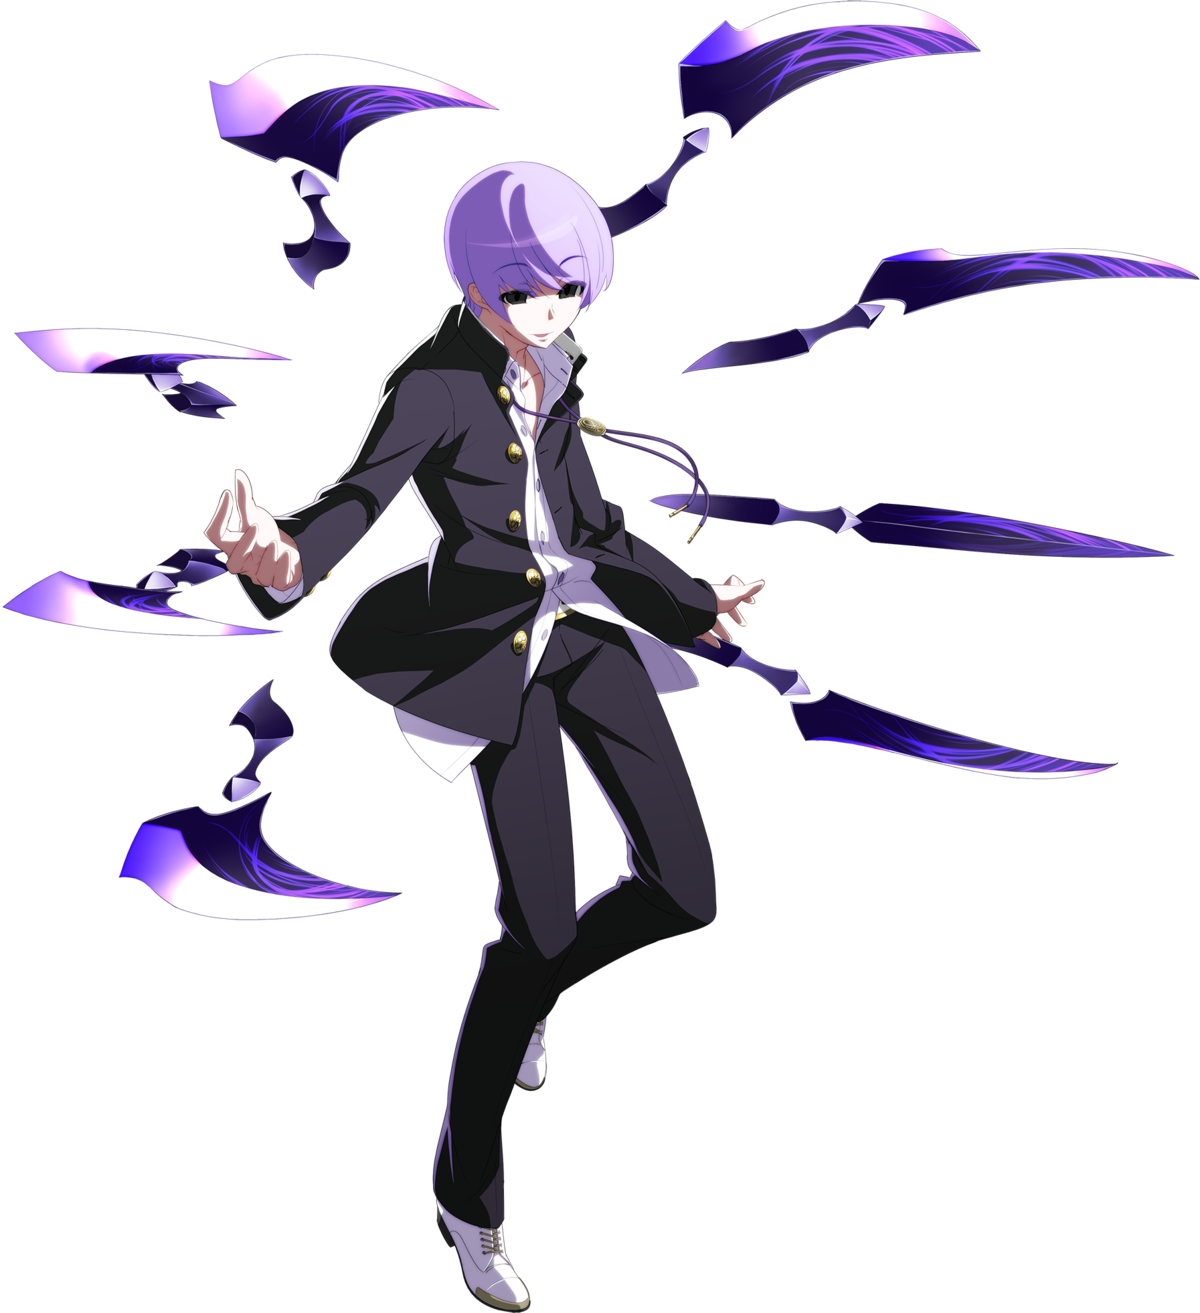 Under Night In Birth Uniclr Byakuya Strategy Mizuumi Wiki While our roots are in the capcom franchises, we invite fans of all fighting game series to augment the site with their strategies and techniques. under night in birth uniclr byakuya